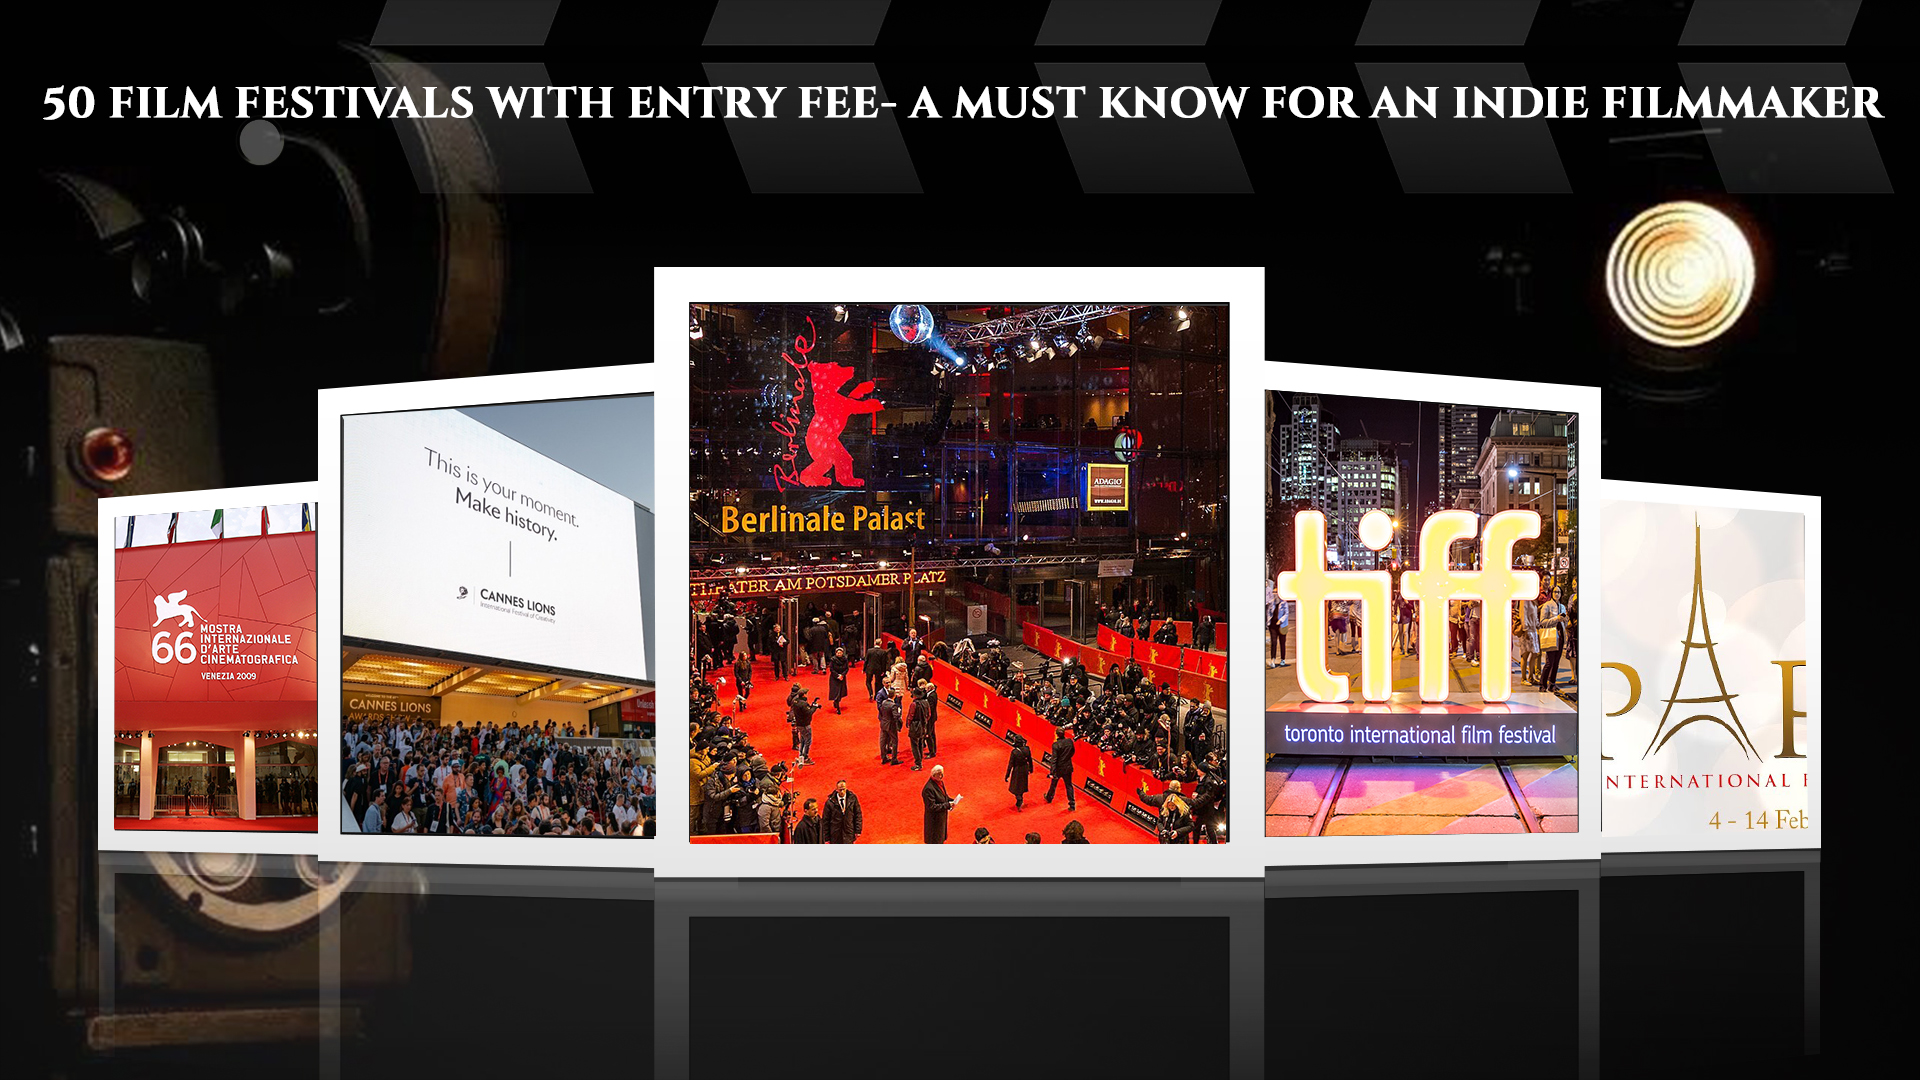 50 Film Festivals With Entry Fee- A must know for an indie filmmaker.